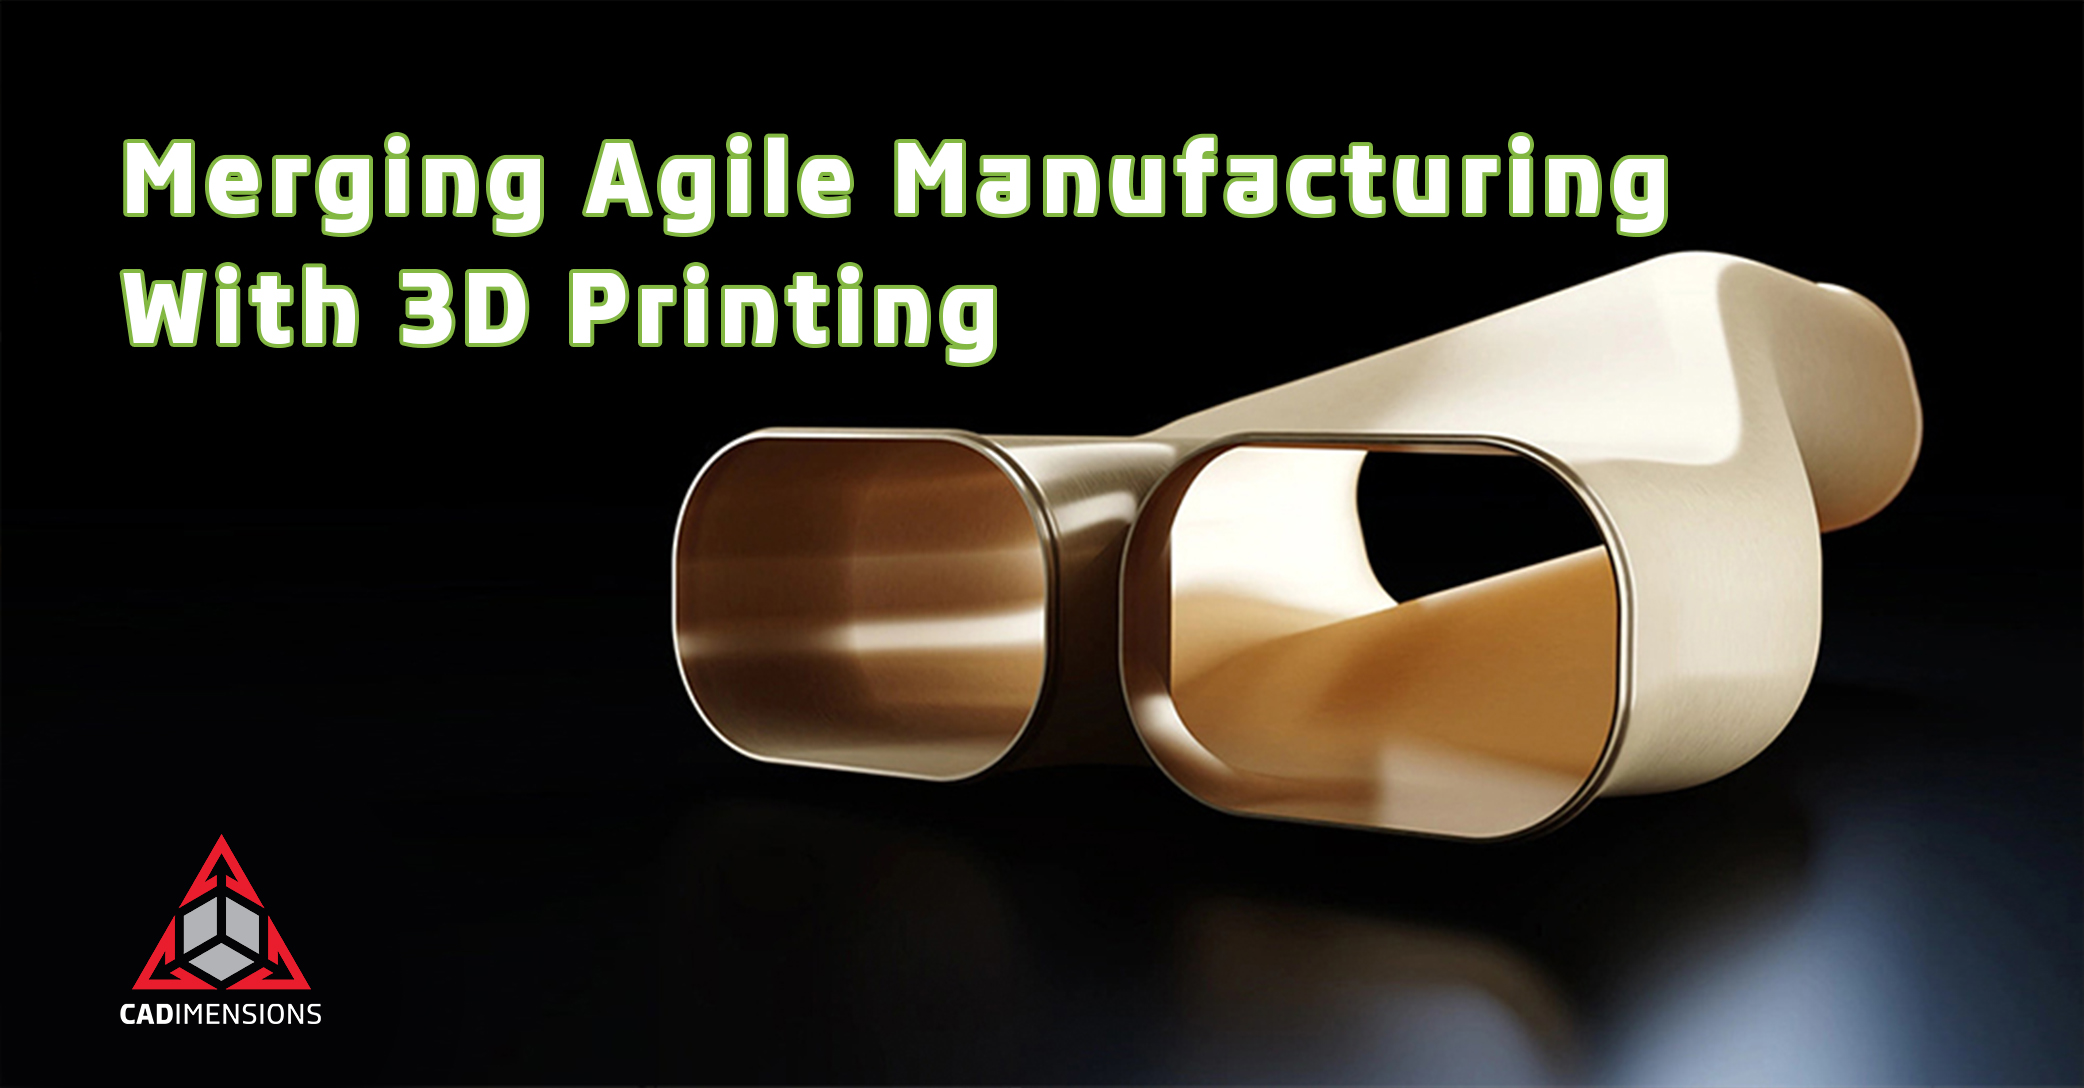 Agile Manufacturing and 3D Printing